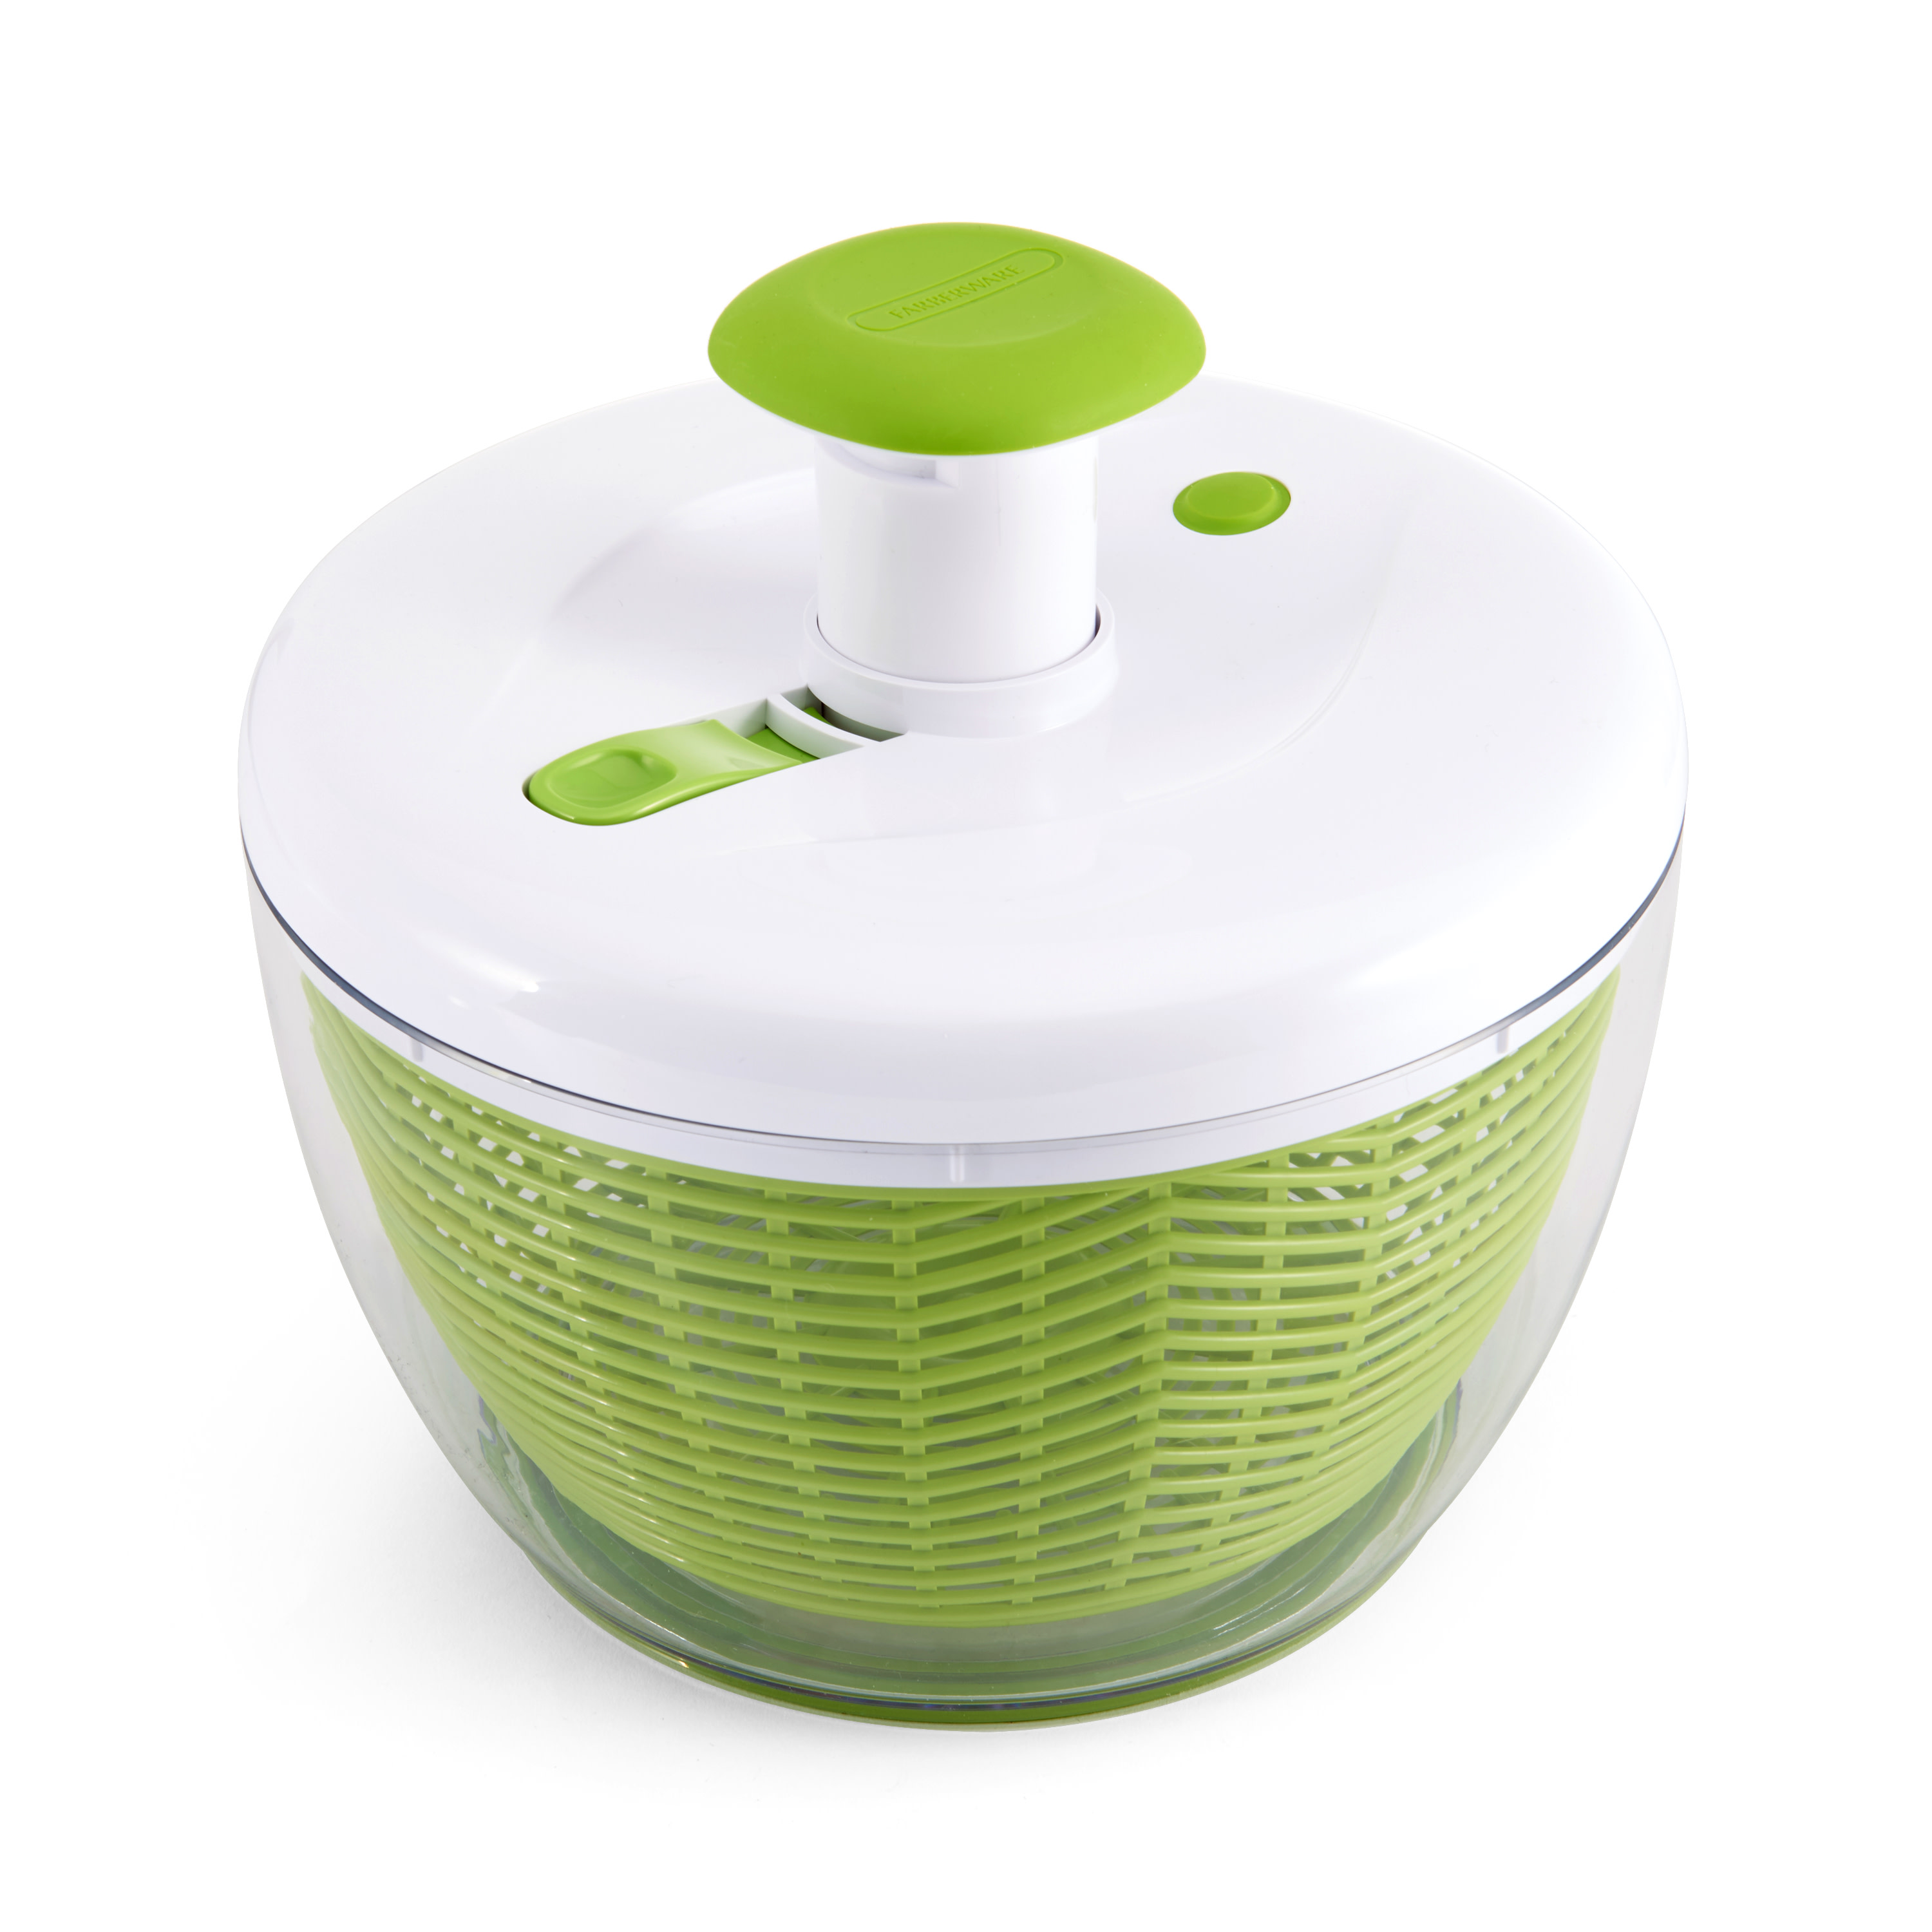 Farberware Professional Plastic 2.4 lb Salad Spinner Green with White Lid - image 1 of 26